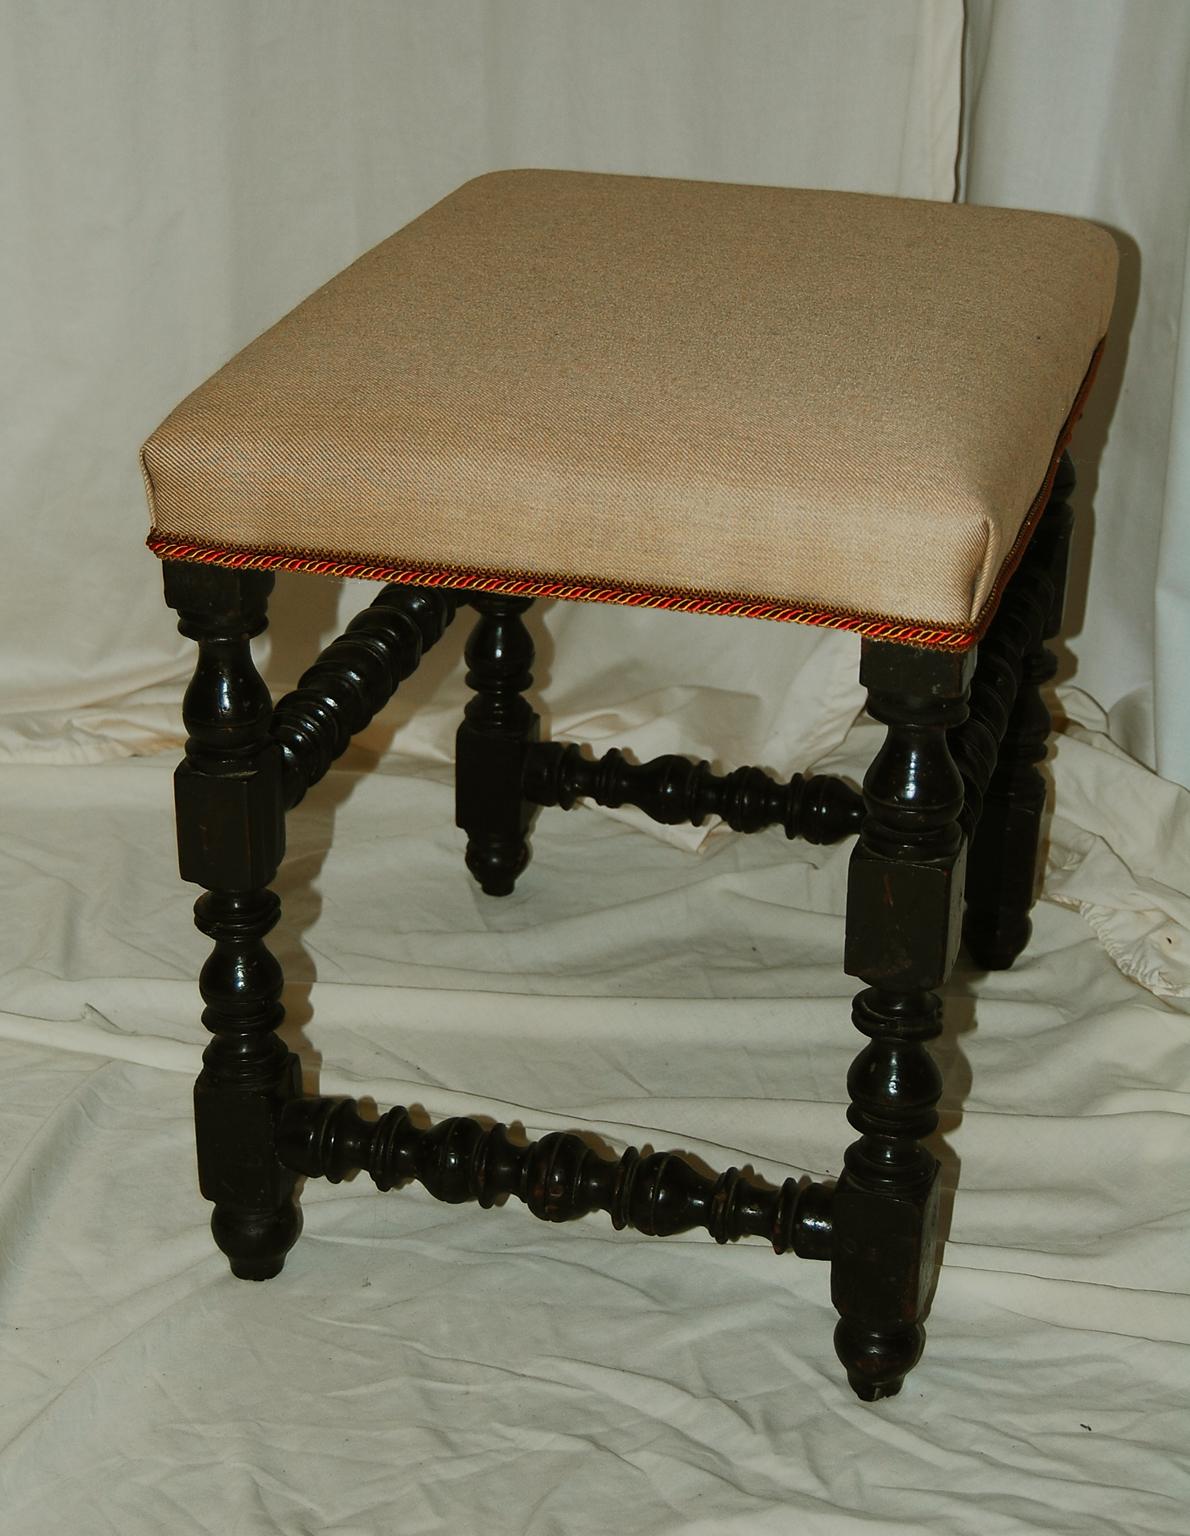 Late 17th Century English William and Mary Period Upholstered Stool Turned Legs and Stretchers For Sale